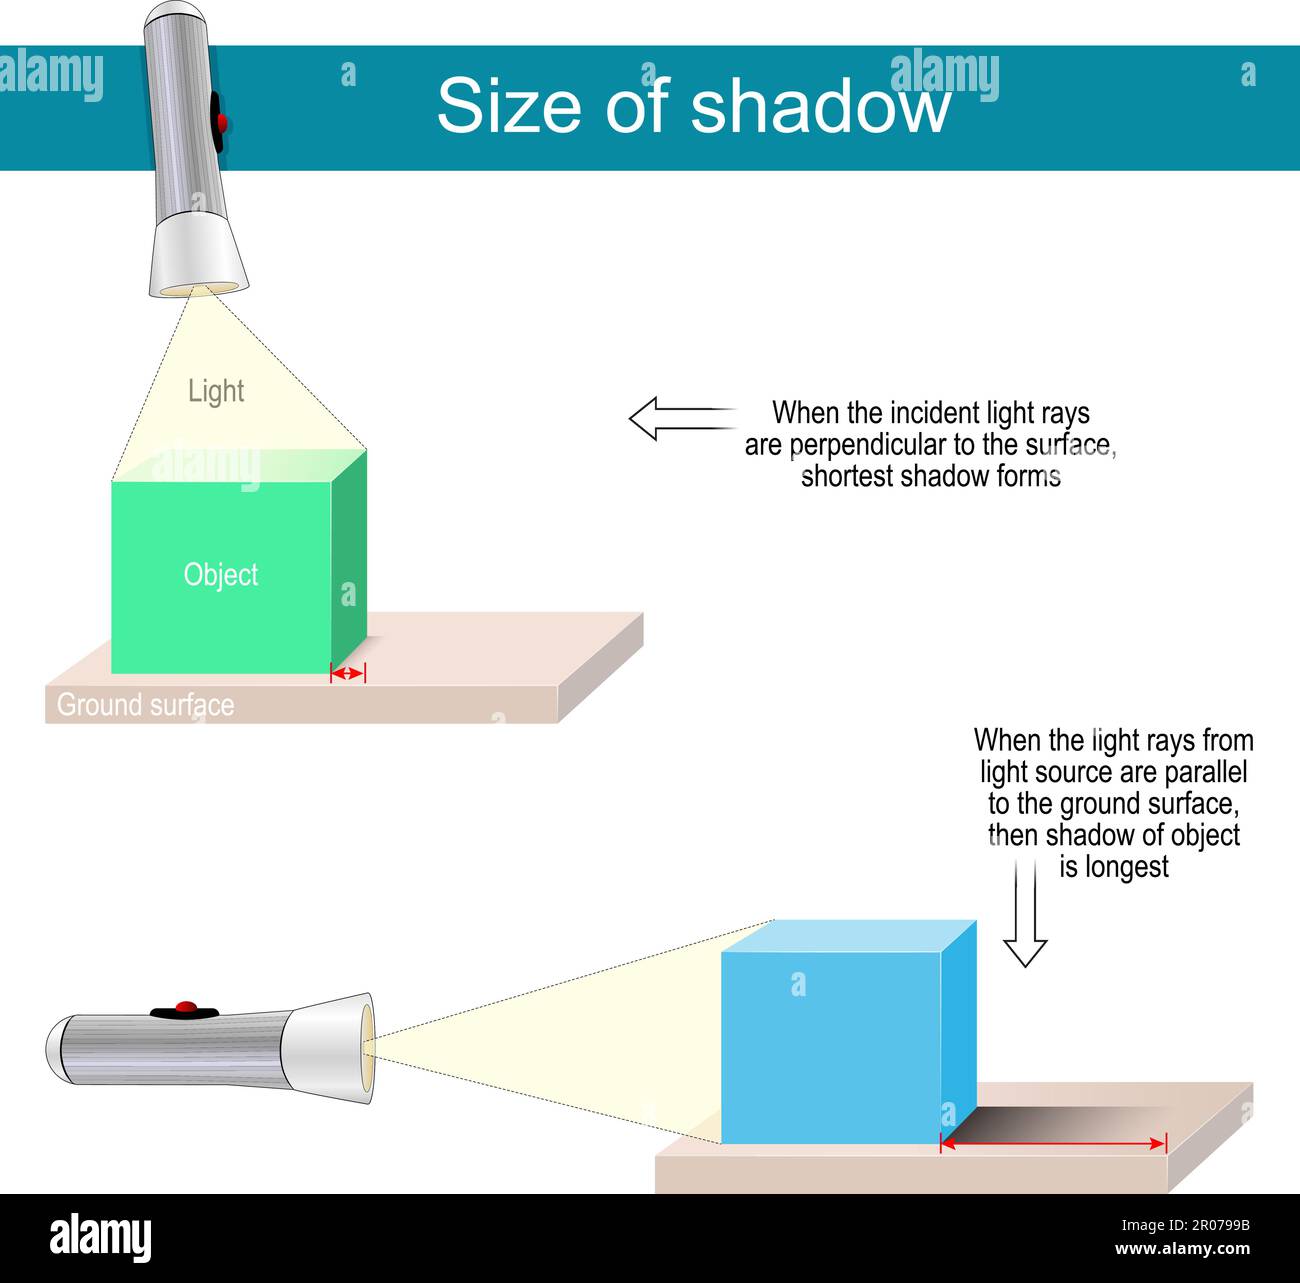 Size of shadow. Experiment with flashlight and box. When the incident light rays are perpendicular to the surface, shortest shadow forms Stock Vector